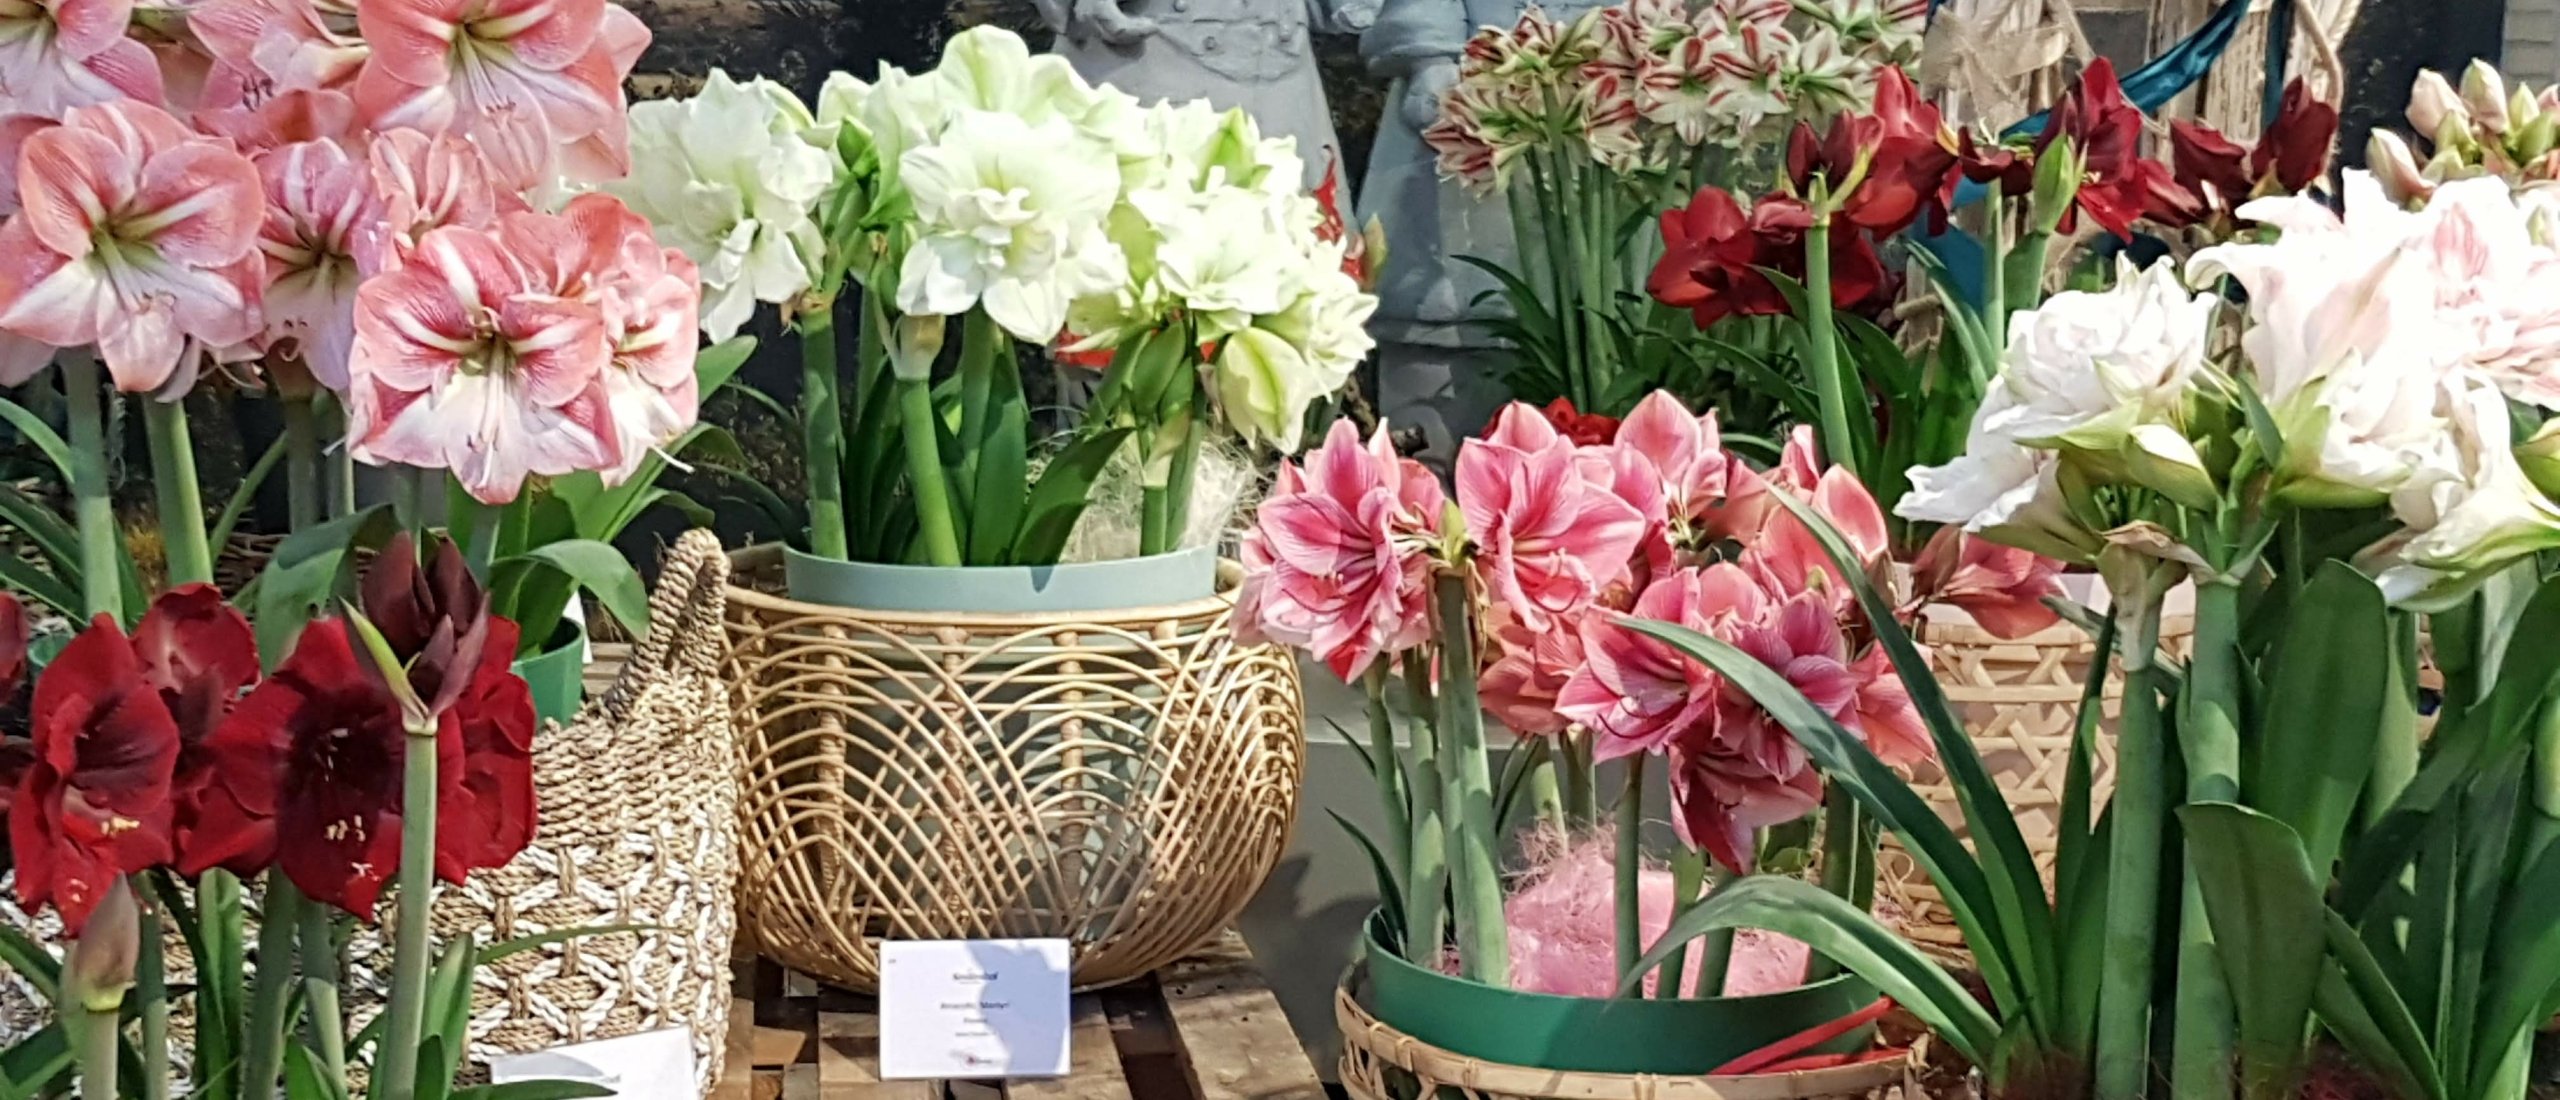 Amaryllis, from bulb to bouquet